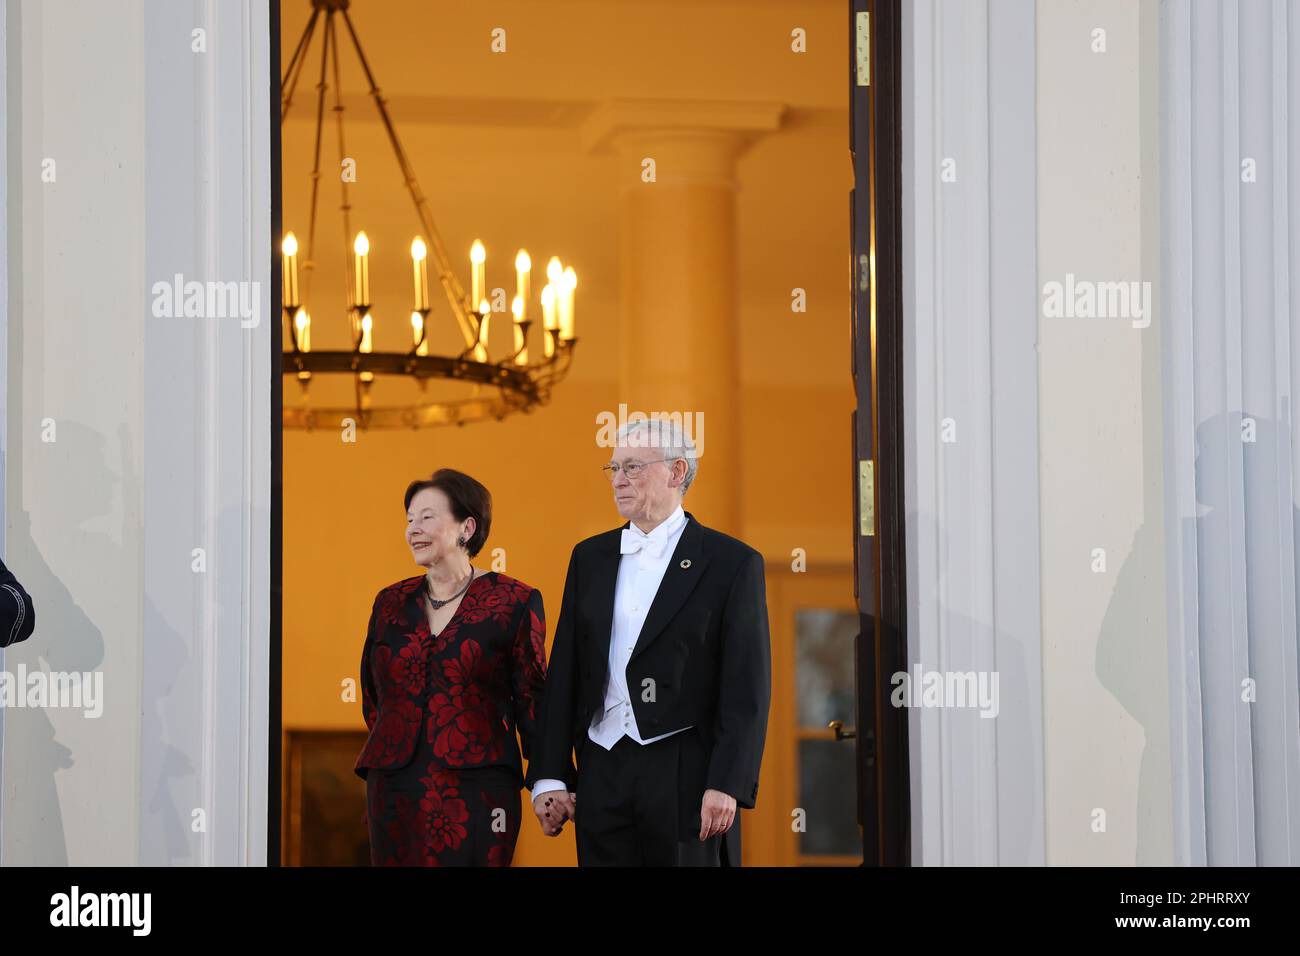 Berlin, Germany. 29th Mar, 2023. Berlin: In the evening, the Federal President invites you to a state banquet in Bellevue Palace in honor of the king. The photo shows former Federal President Prof. Dr. Horst Koehler with his wife Eva Luise Koehler (Photo by Simone Kuhlmey/Pacific Press) Credit: Pacific Press Media Production Corp./Alamy Live News Stock Photo